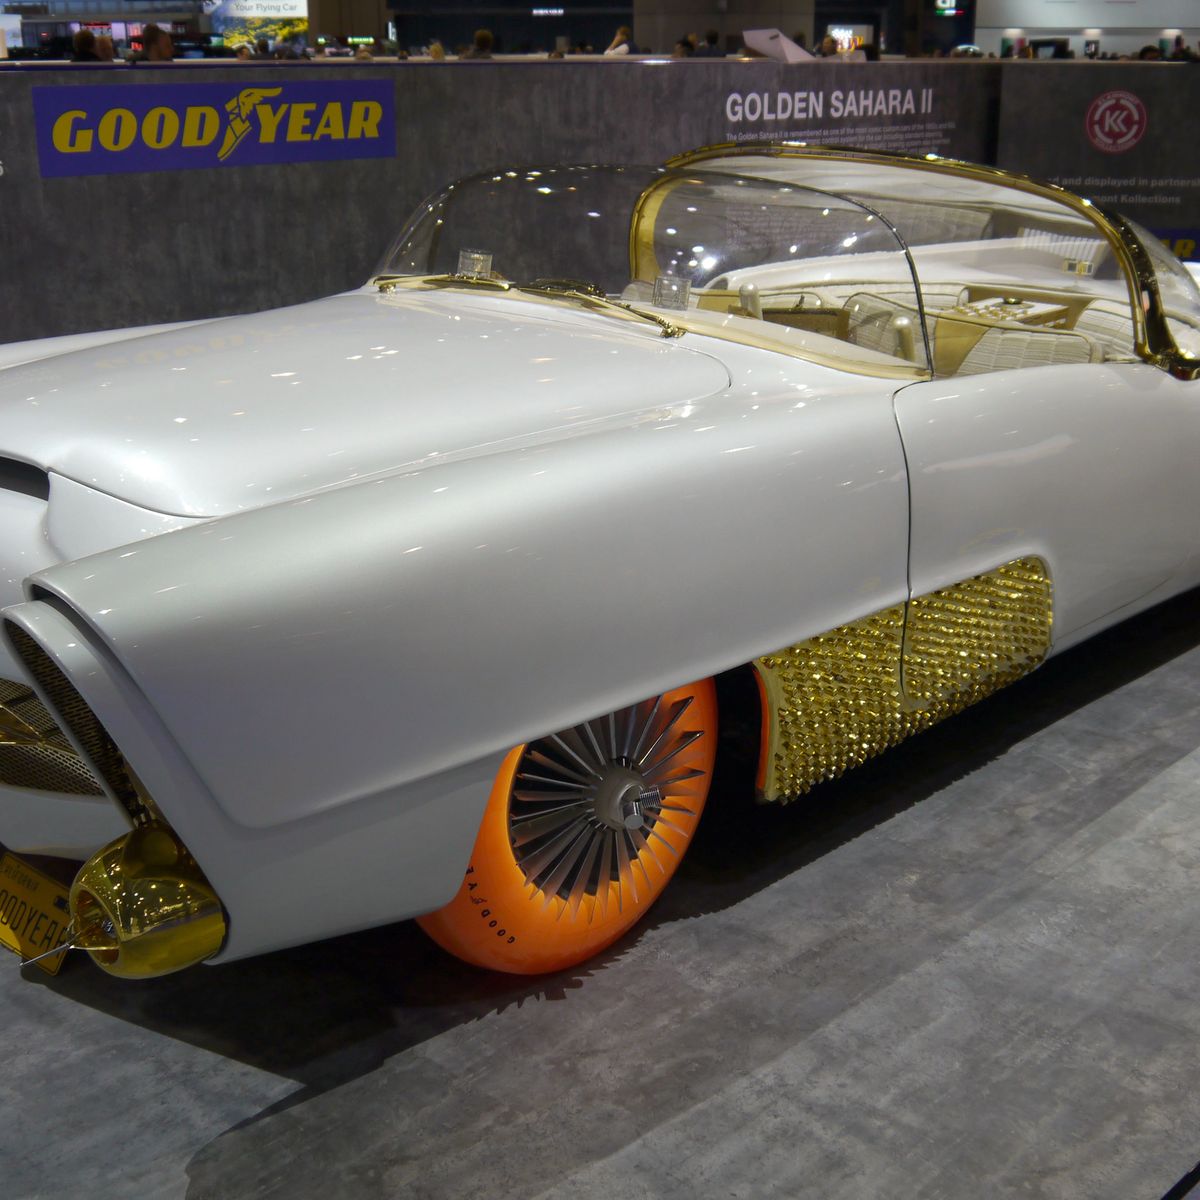 The restored Golden Sahara II debuts in Geneva: How (and why) an American custom resurfaced in